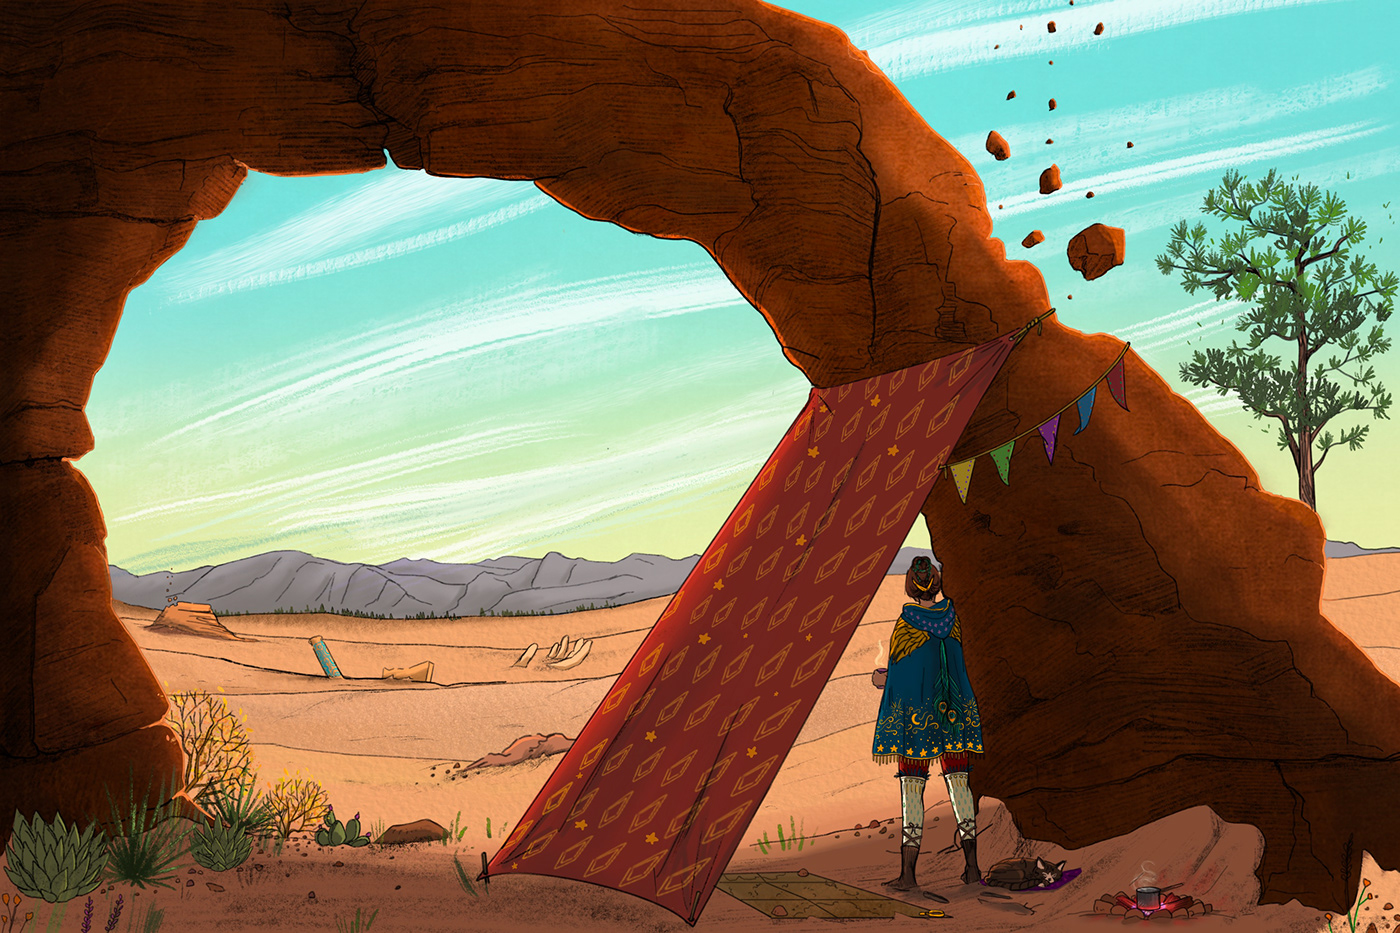 arches desert prompt ruins shadow book illustration MG Illustration Middle grade YA Books young adult